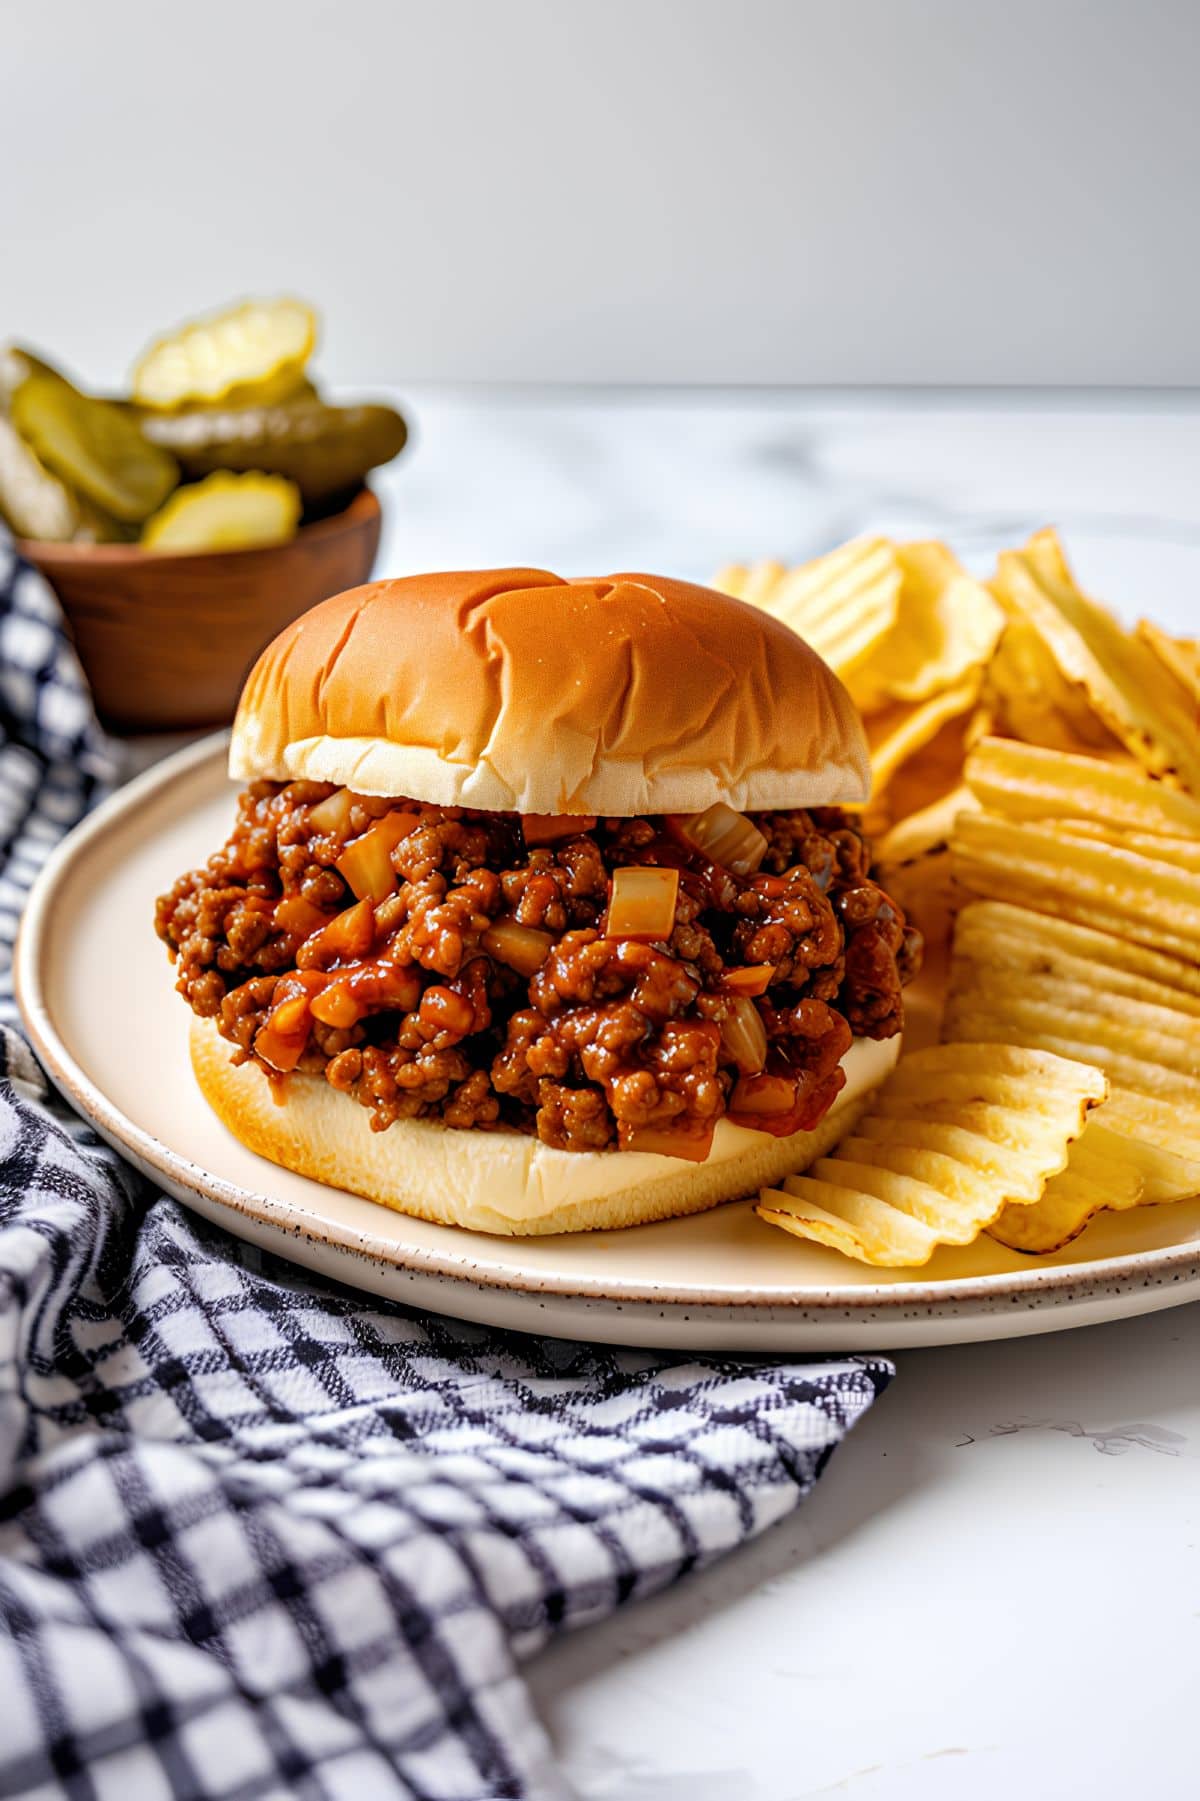 Sloppy Joe with Chips sitting on a white plate, pickles in the background